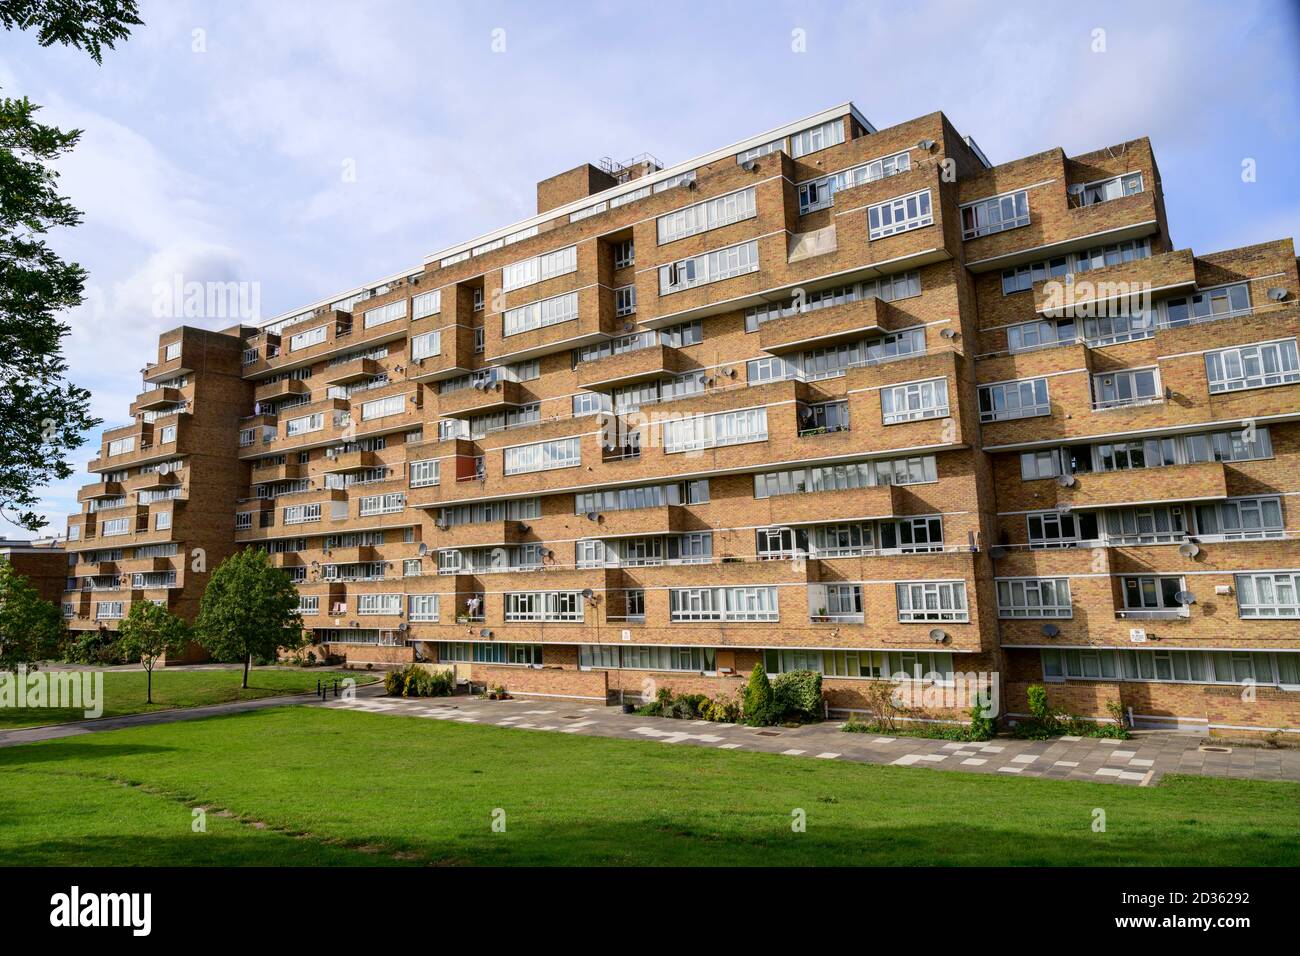 Dawson's Heights modernist housing estate, East Dulwich, London SE22. Designed by architect Kate Macintosh in 1960s. Stock Photo